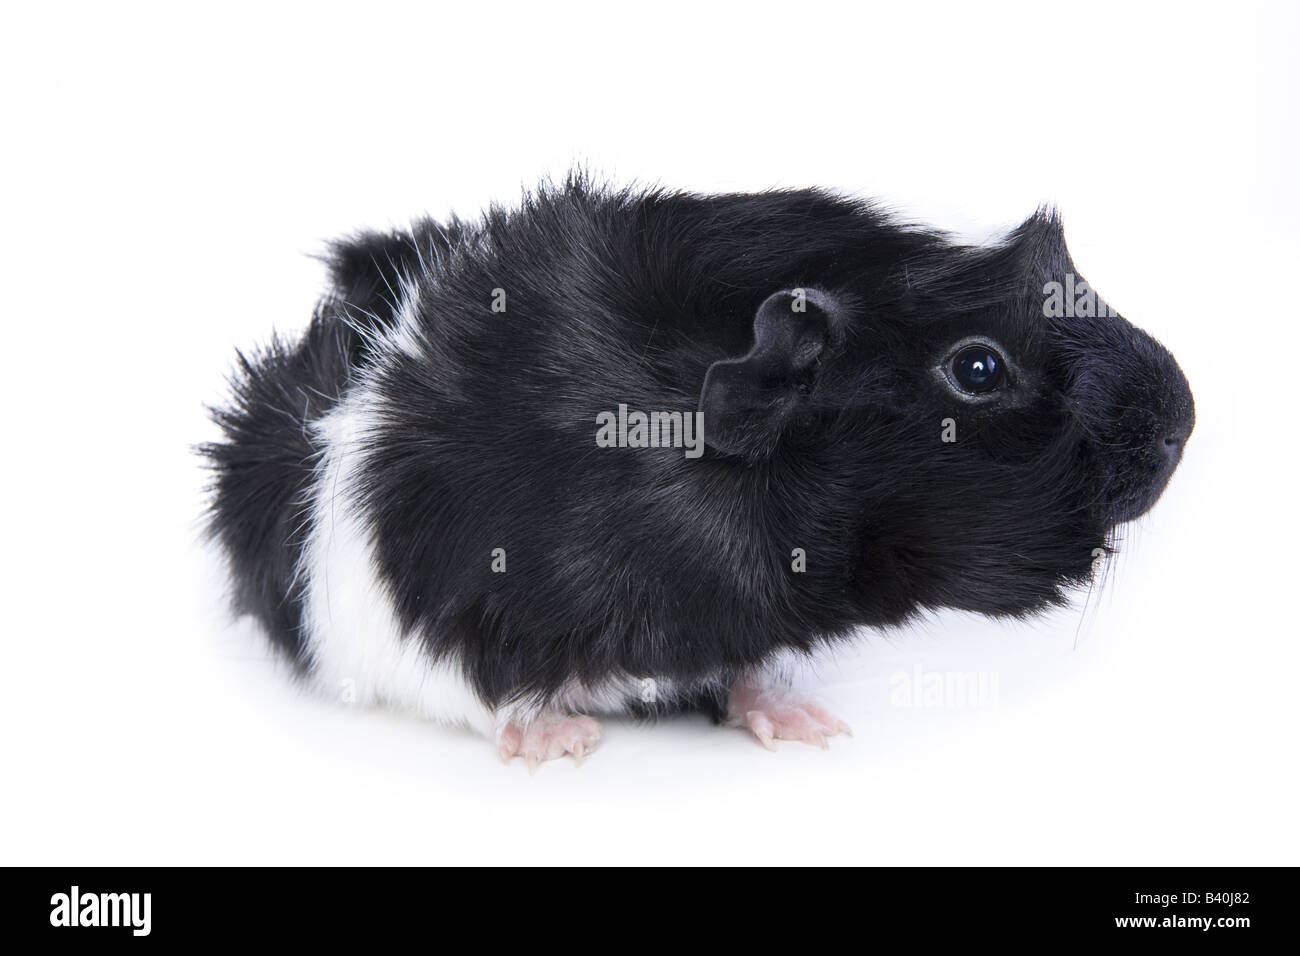 Cute Black and white Abyssinian Guinea pig or Cavy isolated on white background Stock Photo